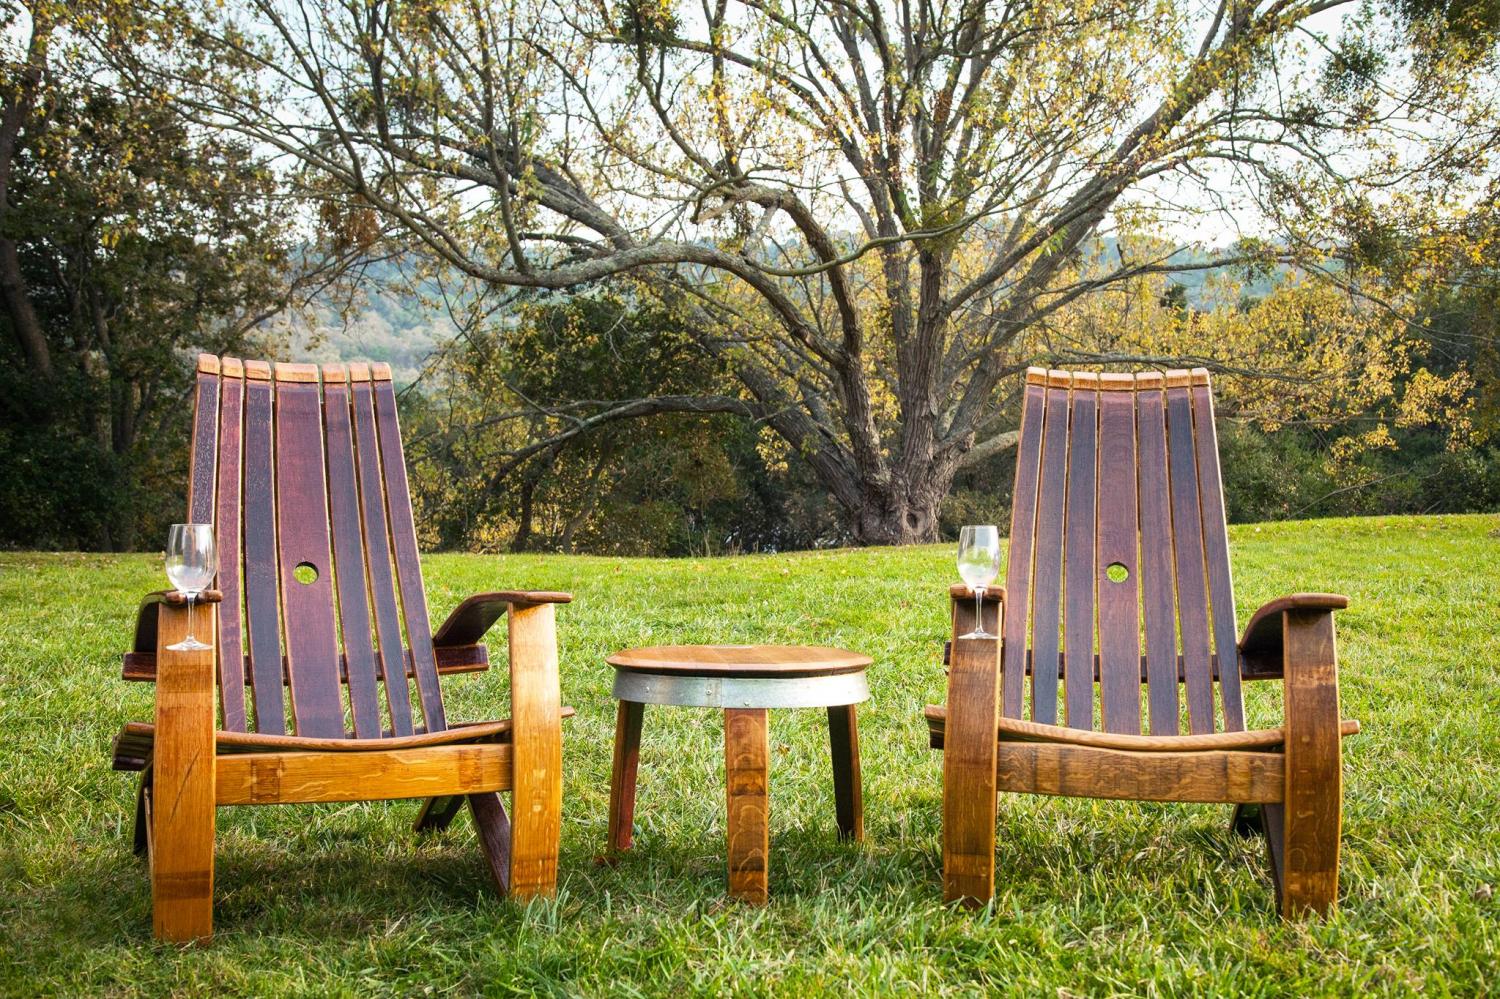 Adirondack Chair Made From an Old Wine Barrel - Wooden Wine Glass holding chair - Wine slot chair